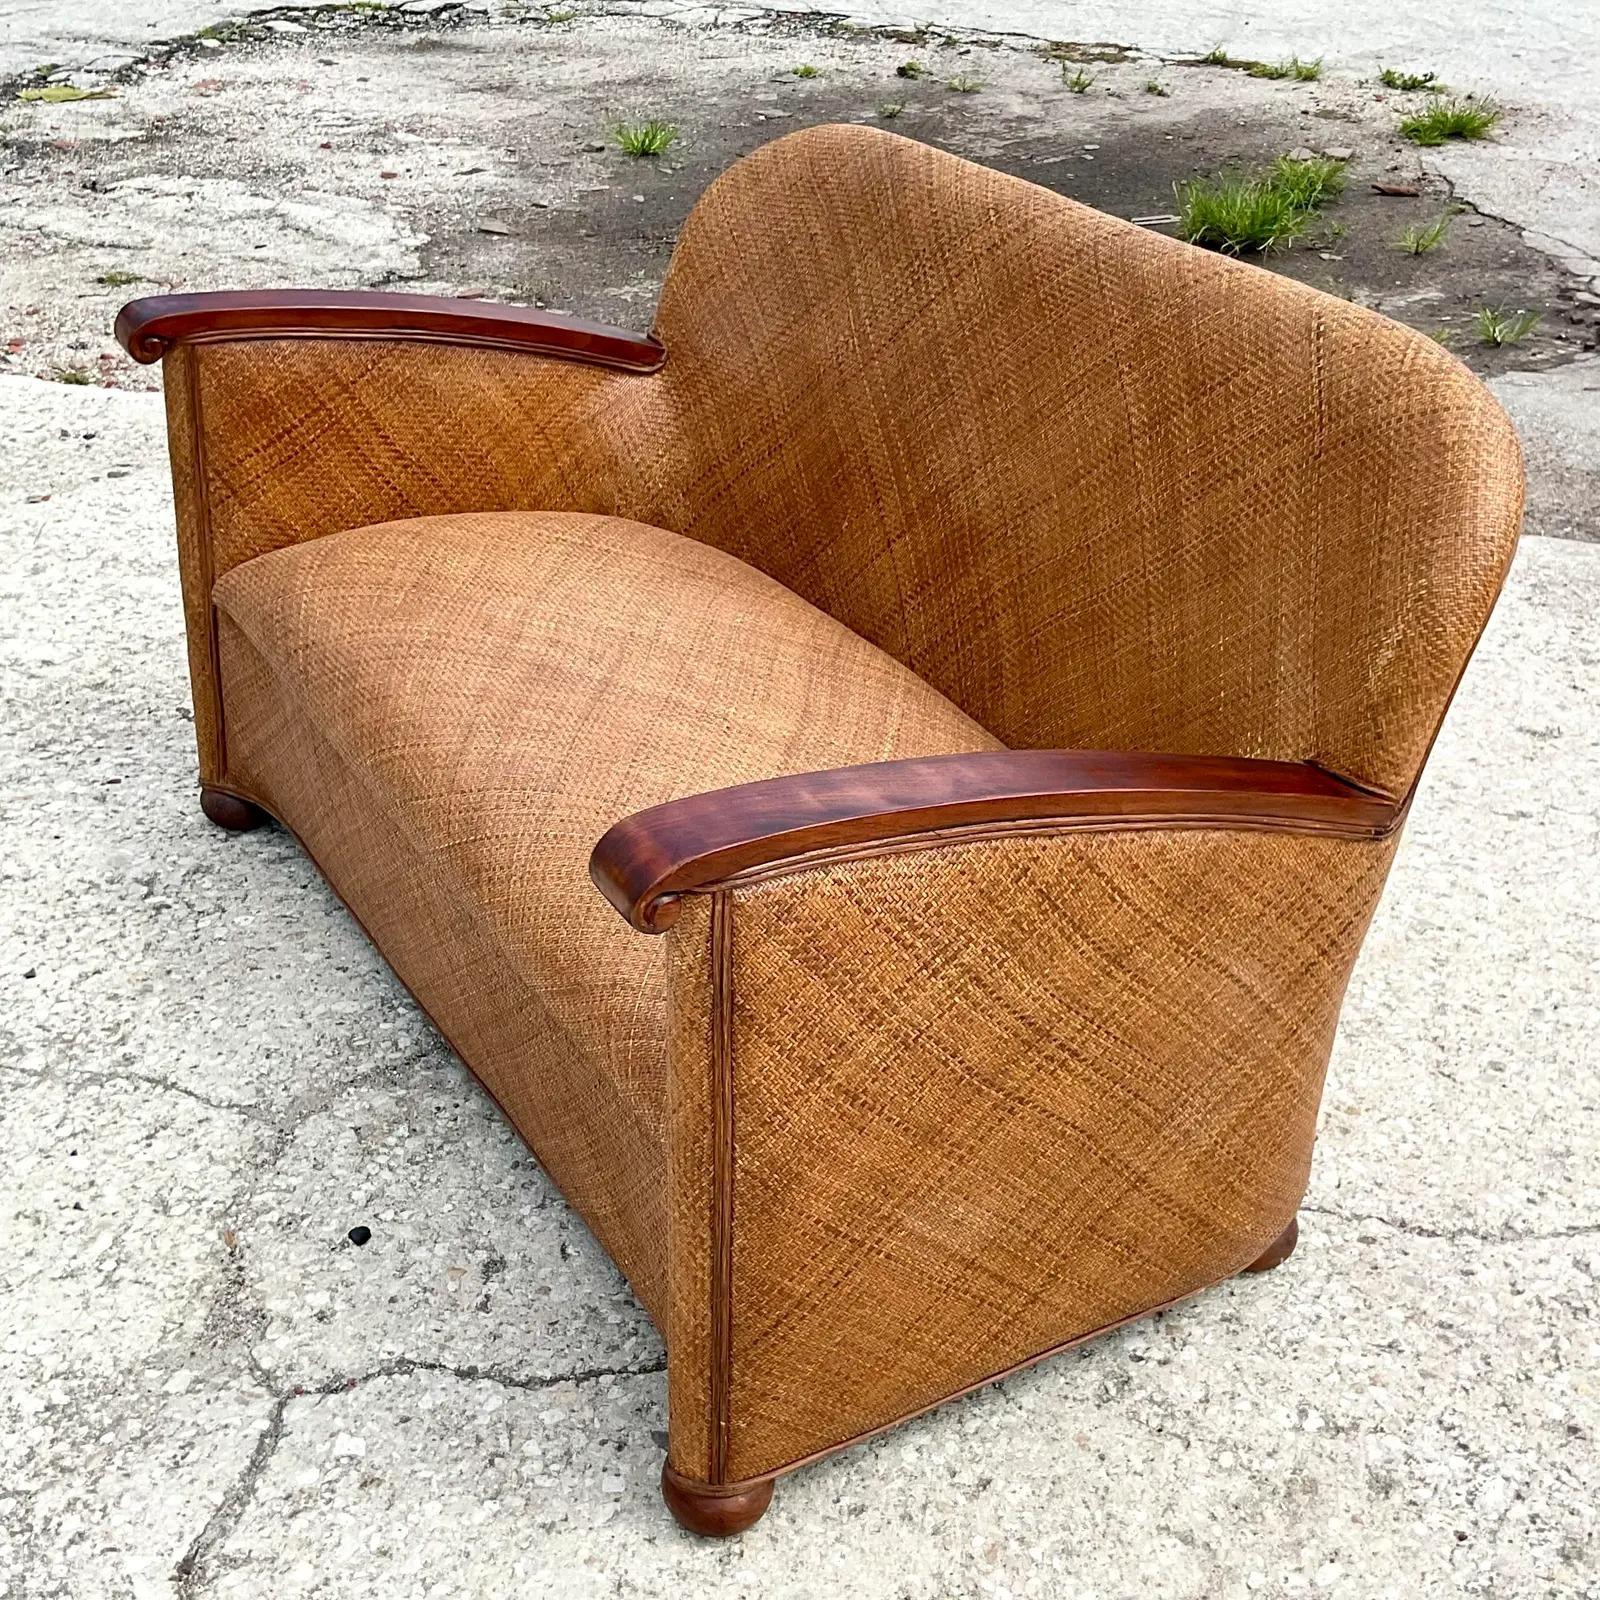 An amazing vintage Coastal sofa. Beautiful all over woven rattan upholstery and sleek wooden arms. A chic and polished look for your relaxed room. Acquired from a Palm Beach estate.